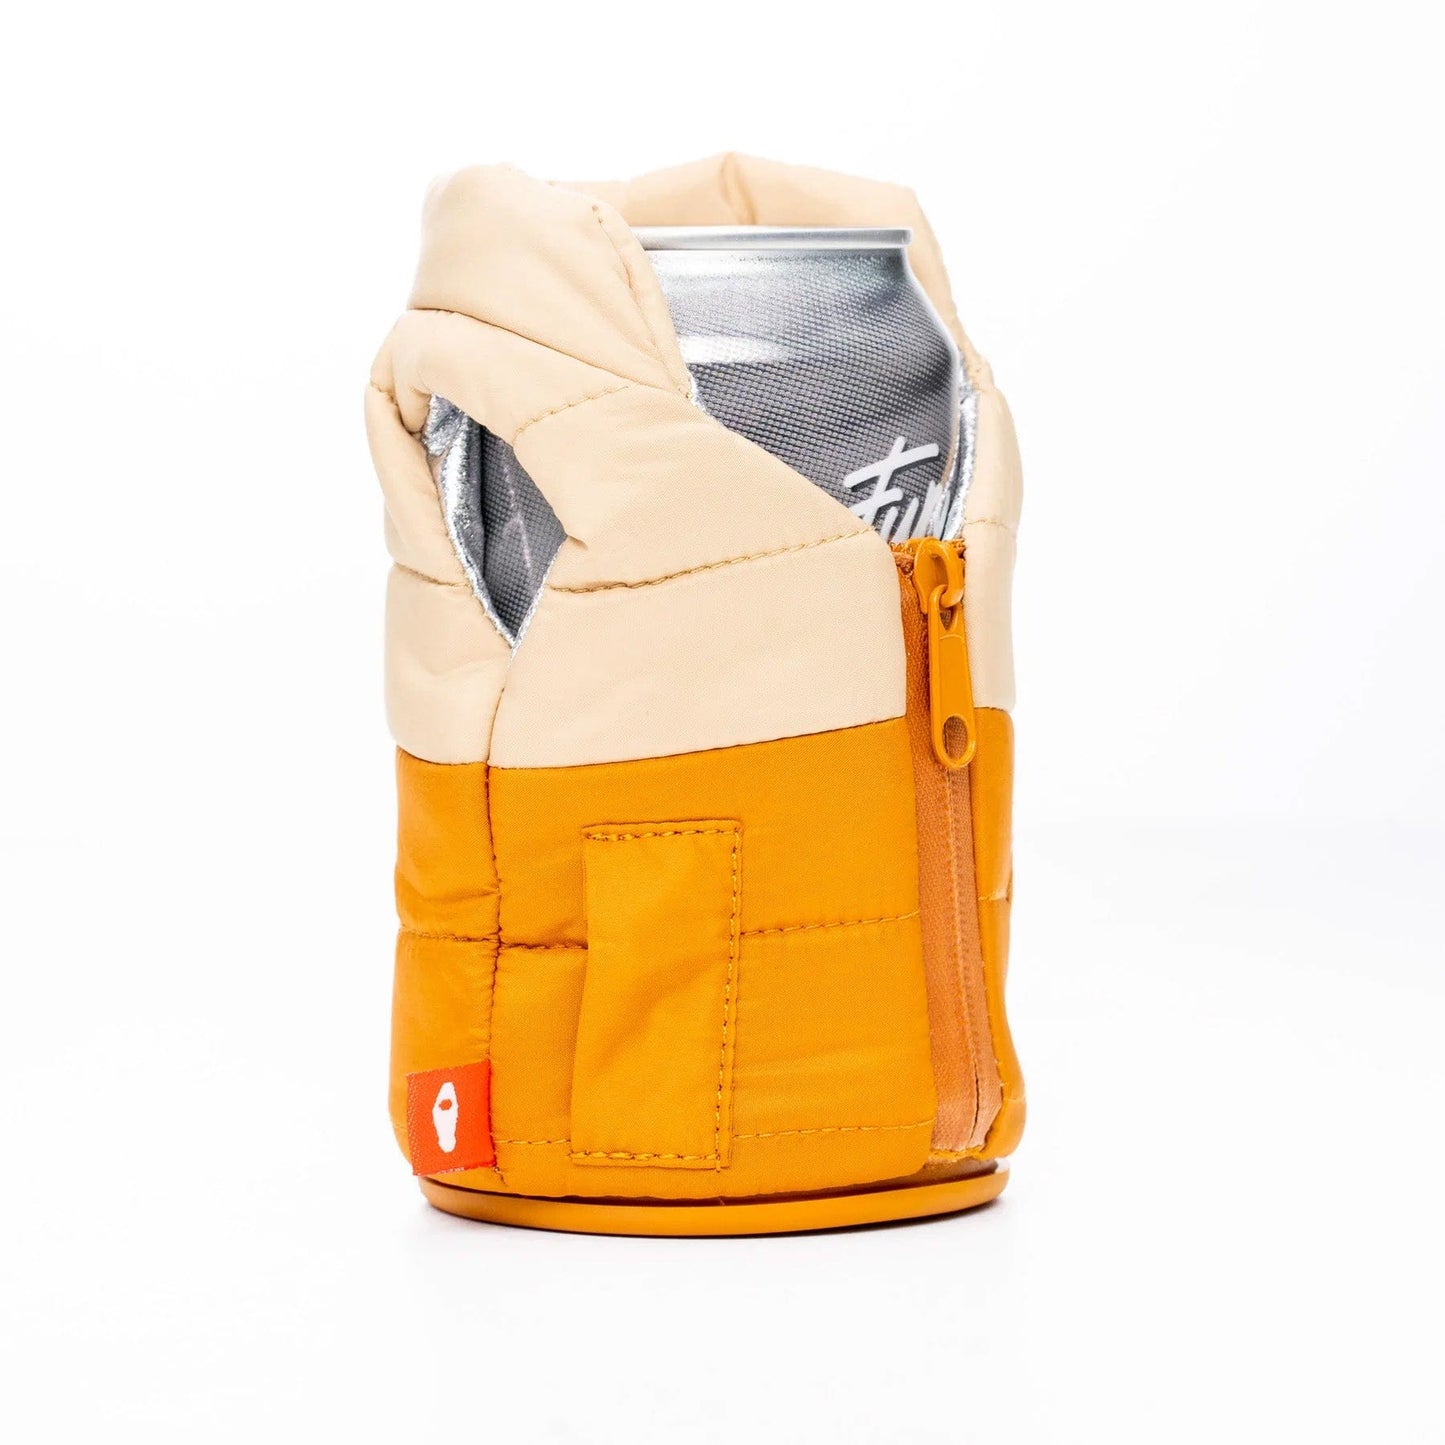 Custom The Puffy Vest Coozie